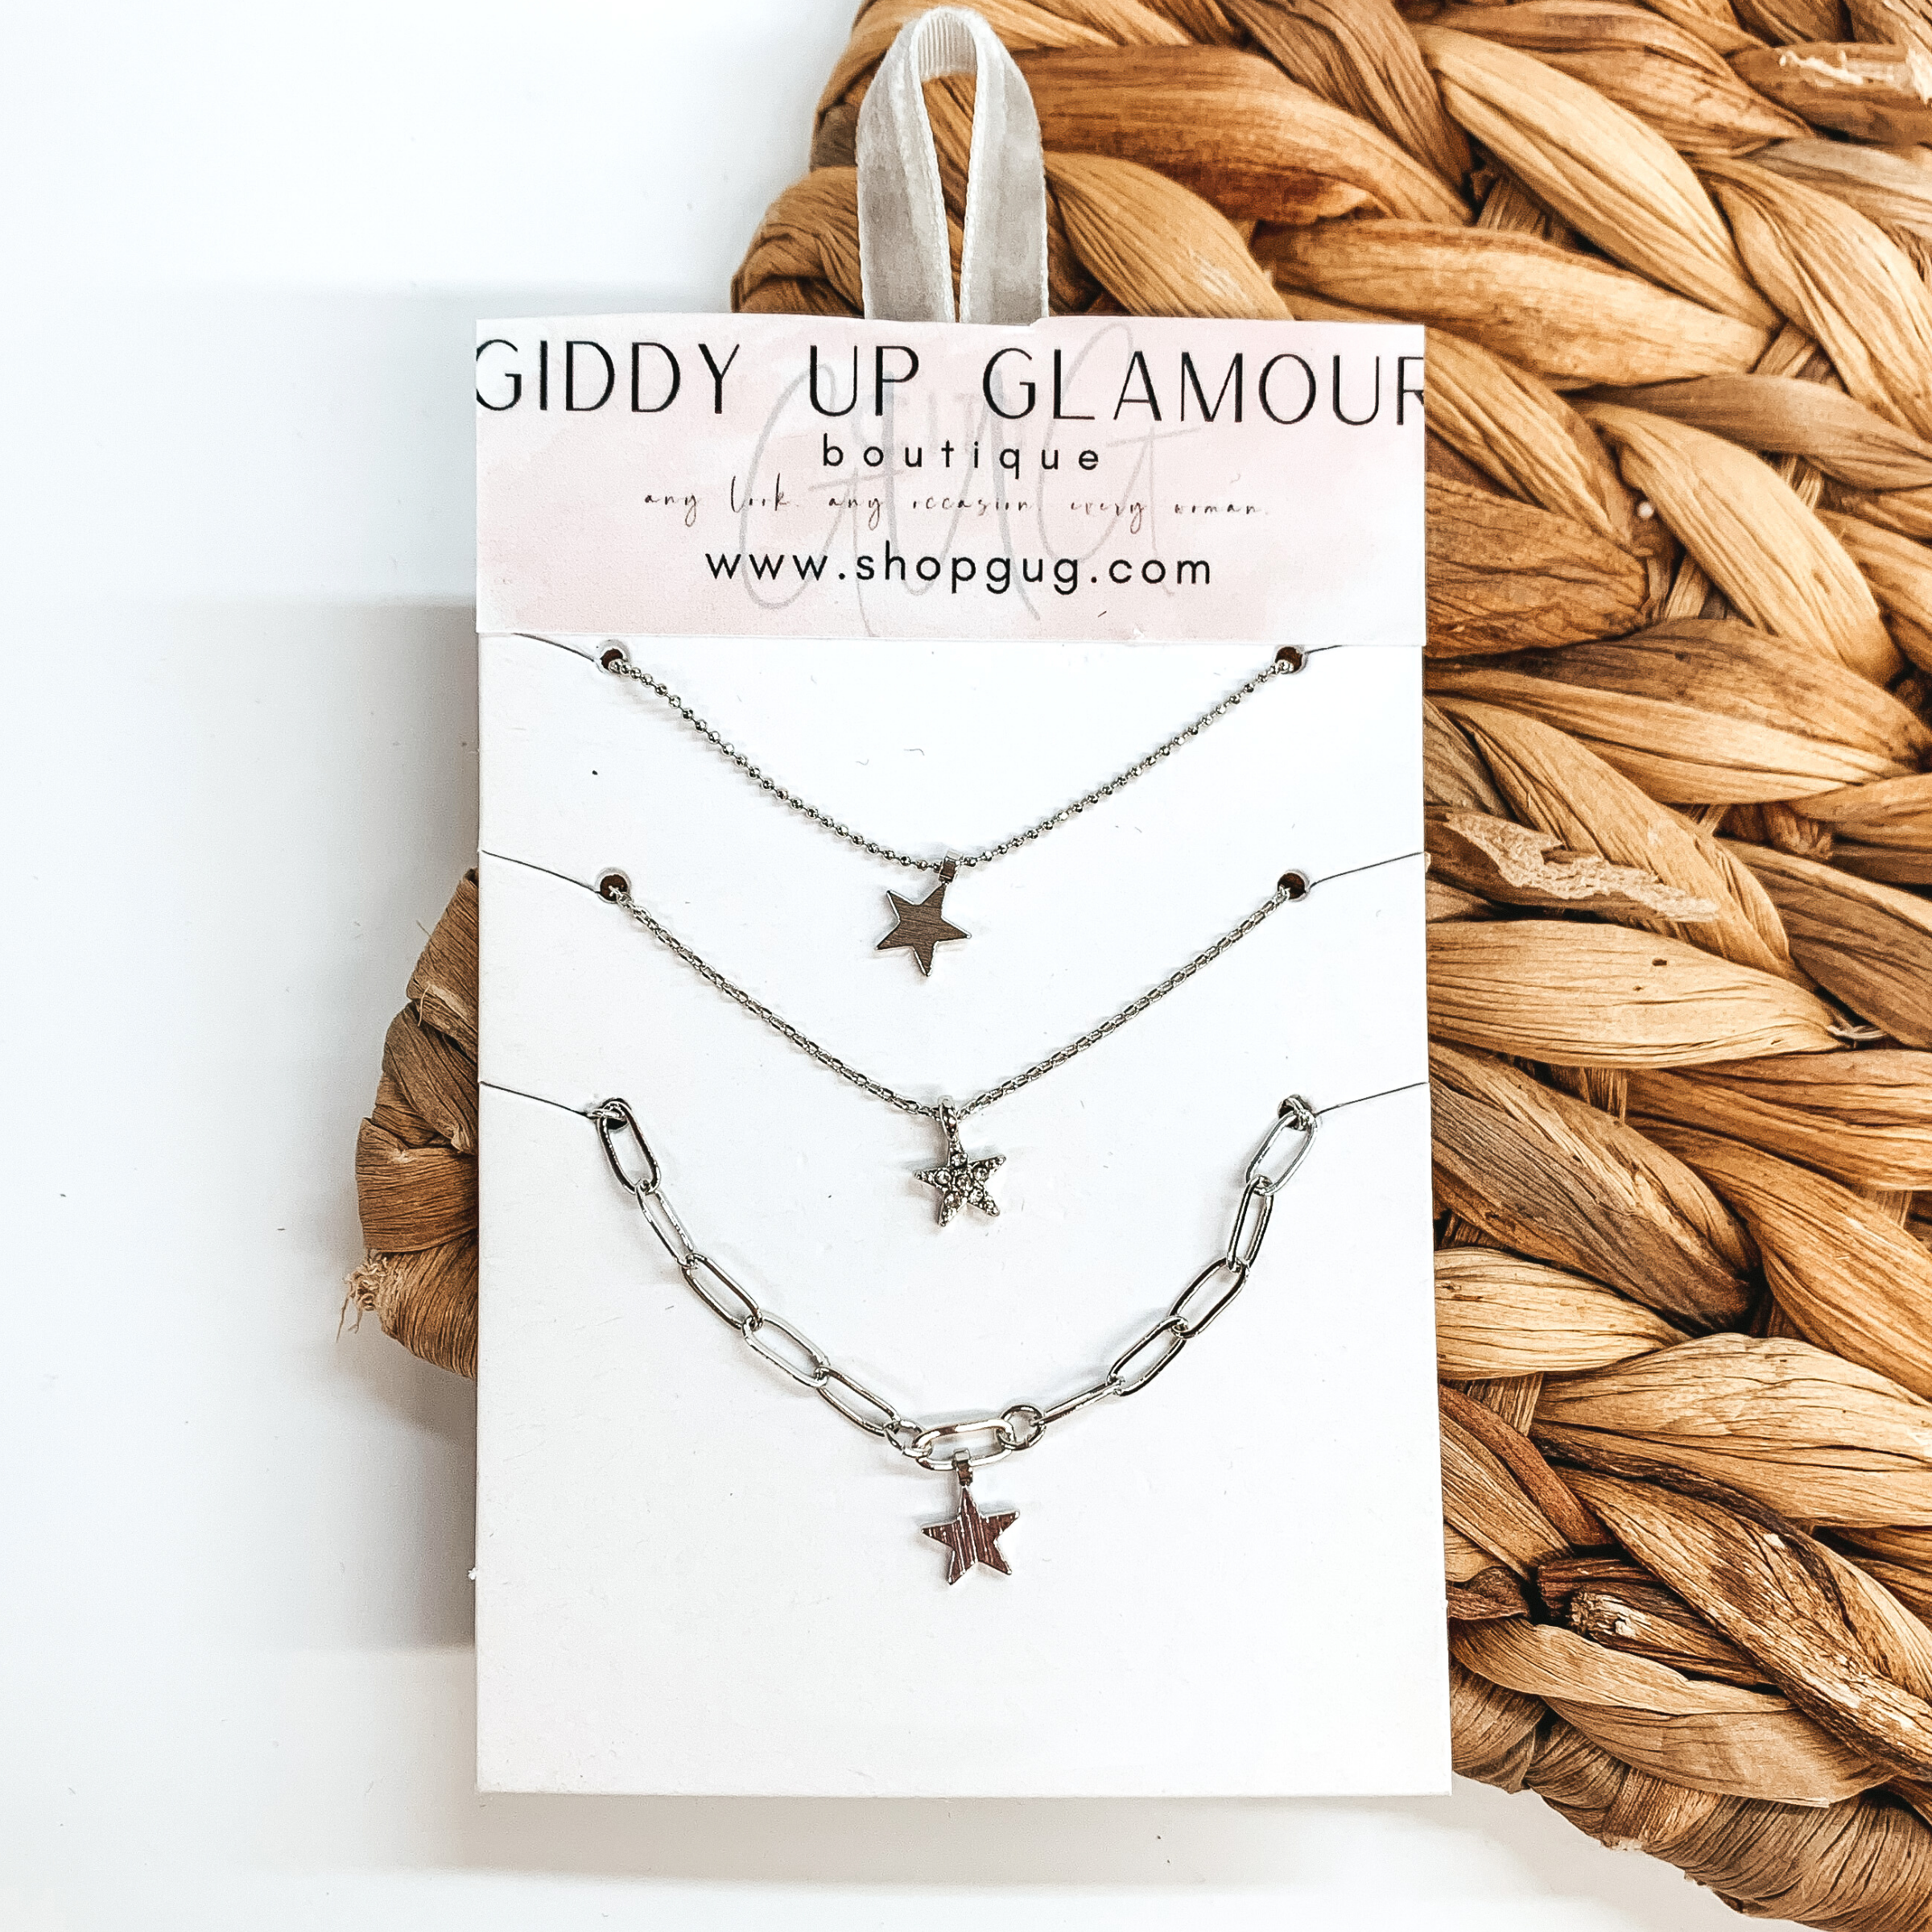 Set of Three | Silver Chain Necklace Set with Star Charms - Giddy Up Glamour Boutique